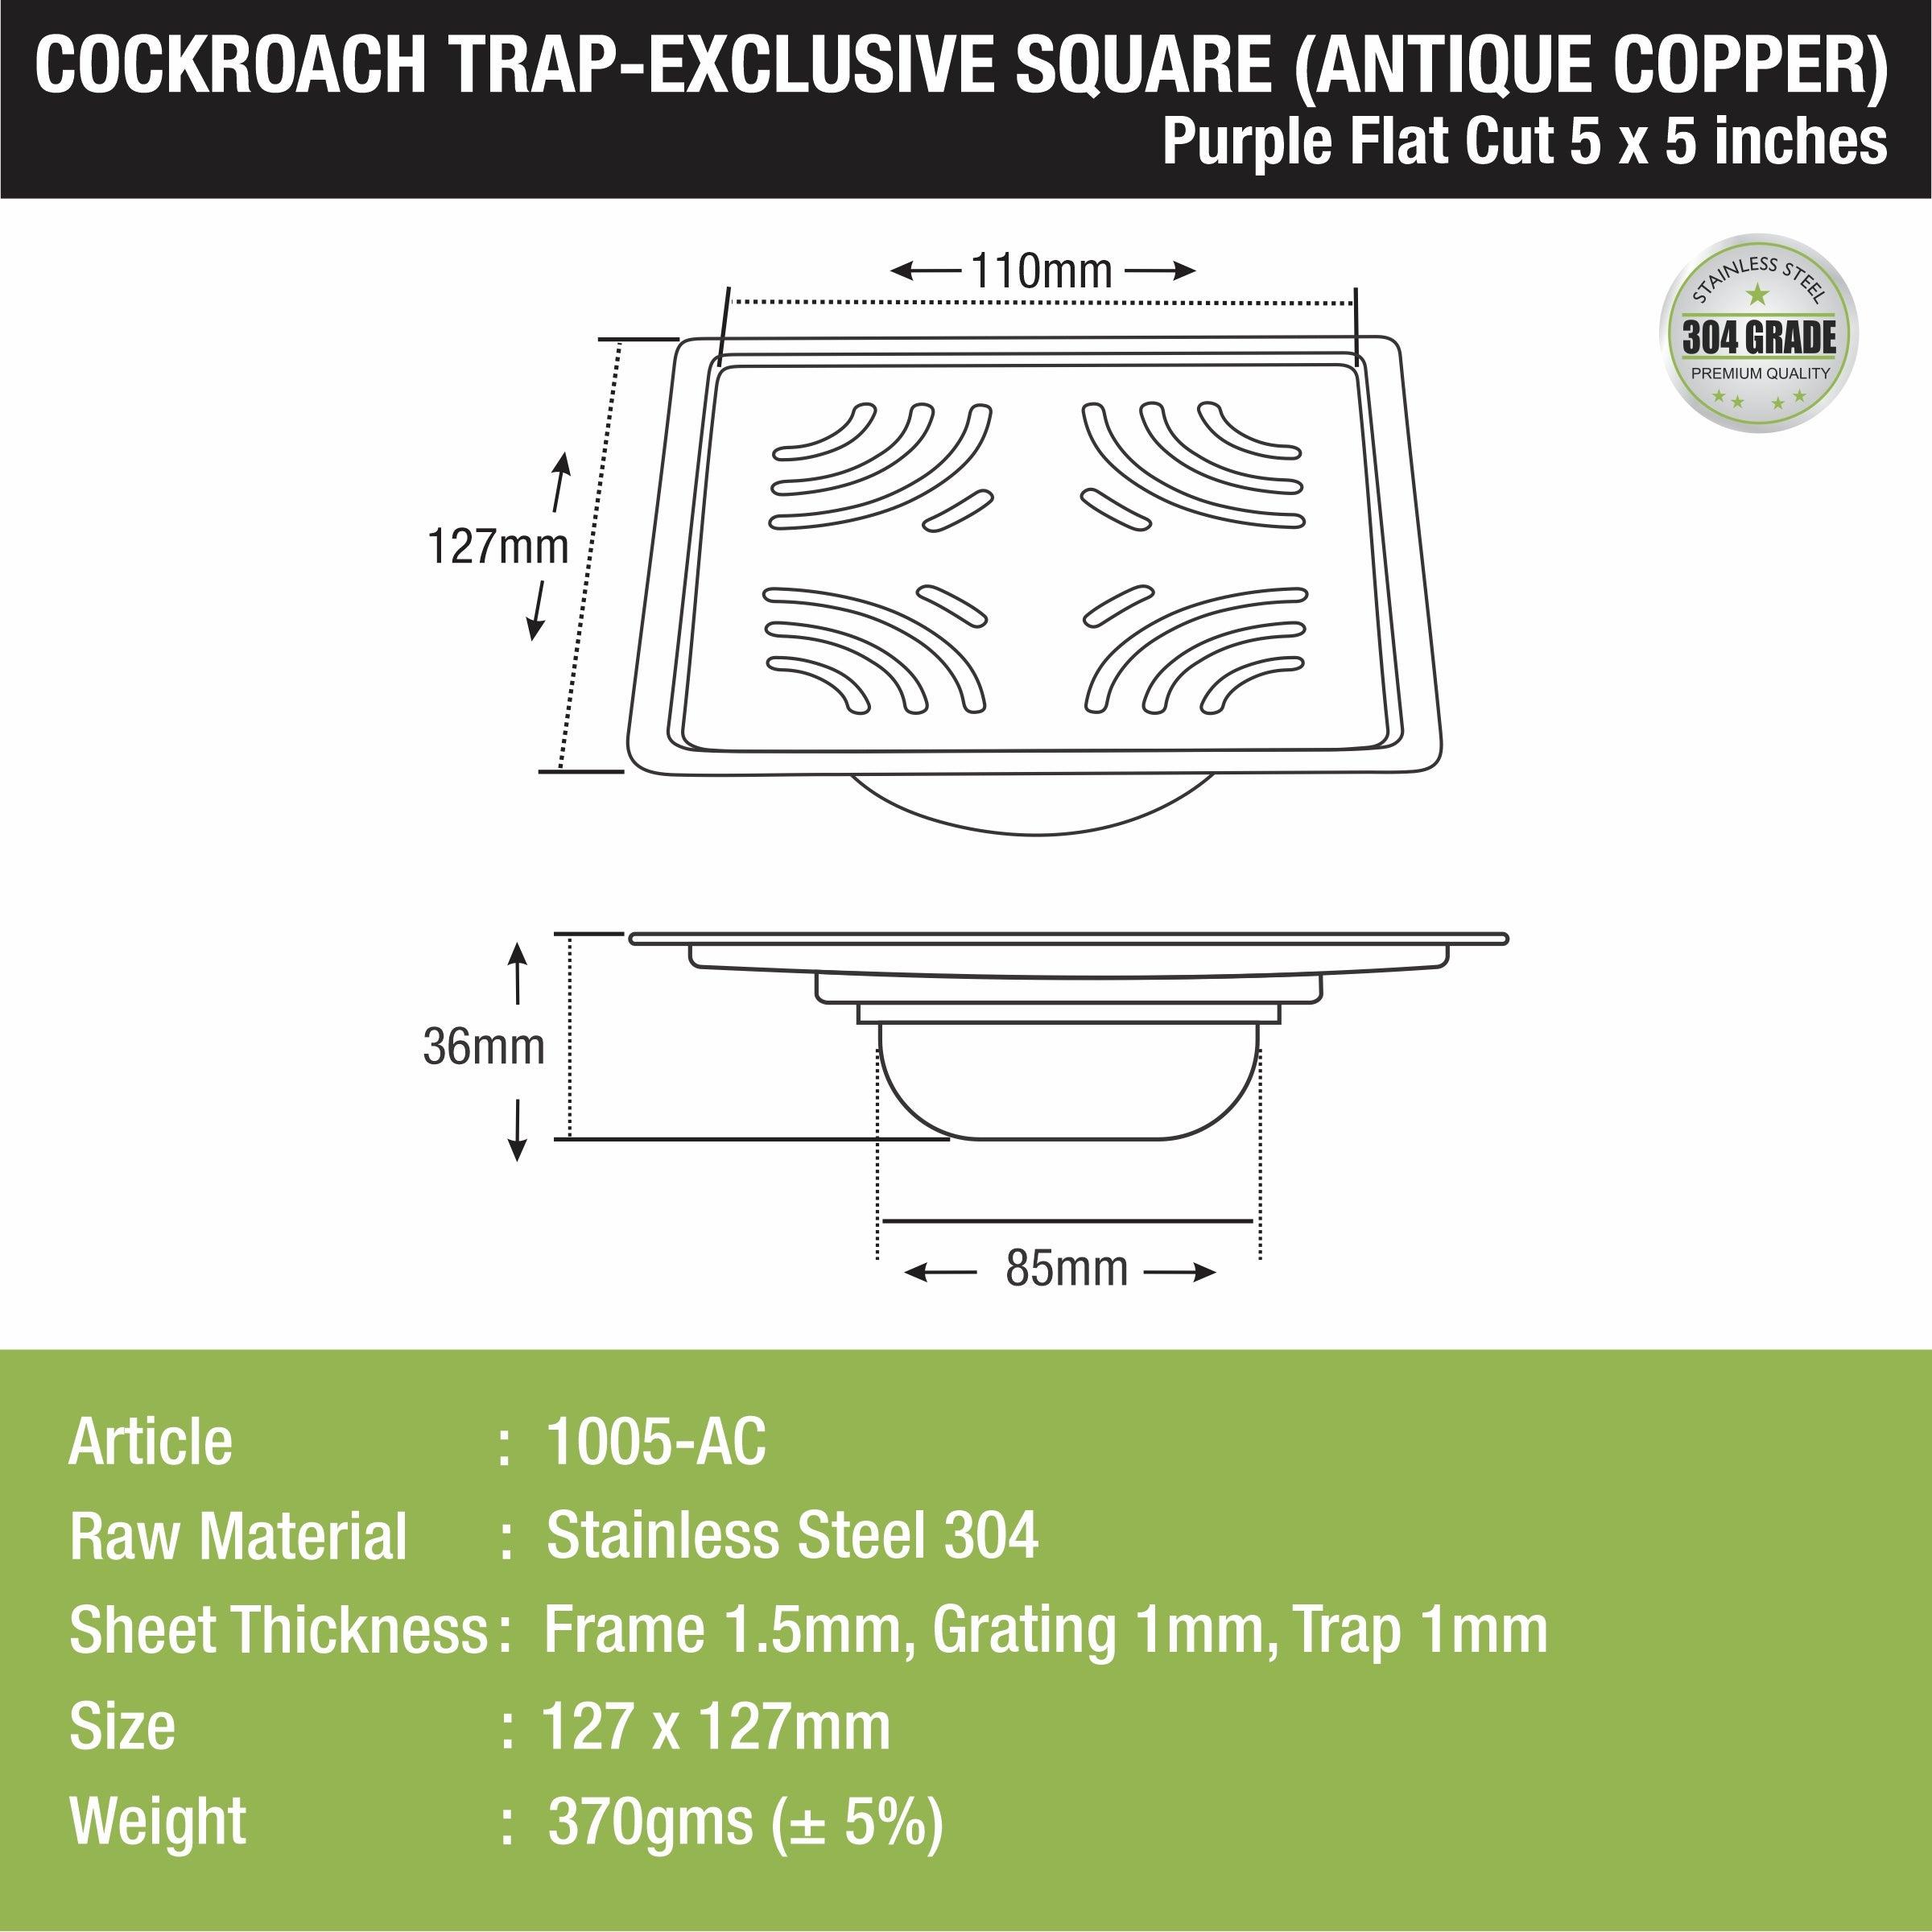 Purple Exclusive Square Flat Cut Floor Drain in Antique Copper PVD Coating (5 x 5 Inches) with Cockroach Trap sizes and dimensions